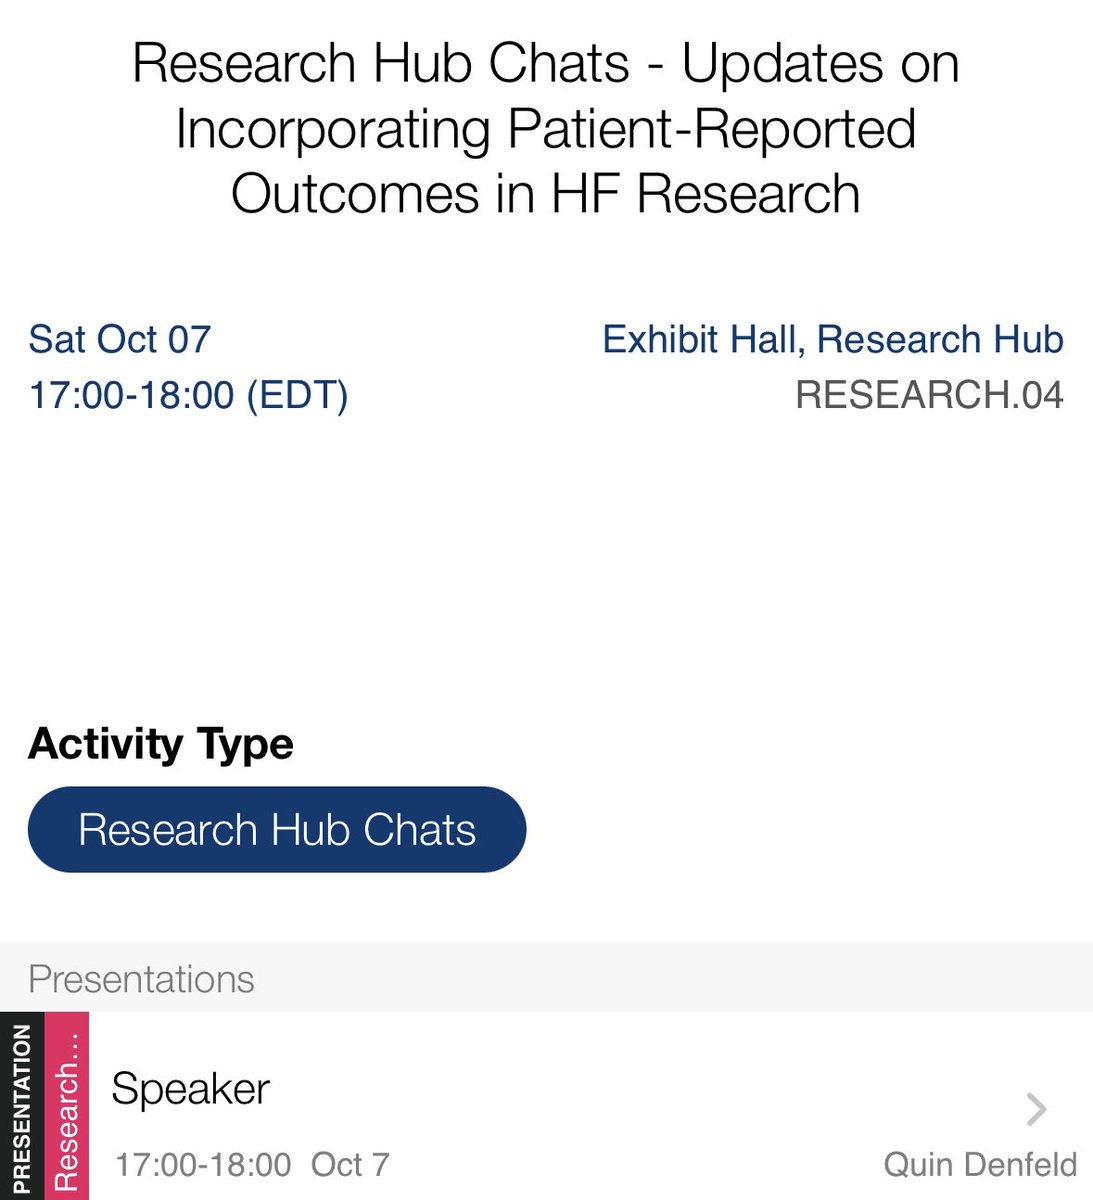 Attn: #HFSA2023 attendees!

As you build your Saturday schedule, pls ✅ out these informal research chats in the Exhibit Hall:
8-9am: HFRN 
1-2pm: AI in HF research
5-6pm: PROs in HF 

Come over & chat w/ thought leaders!

@GivertzMichael @mpsotka @Tereshchenkolab @BidwellJT